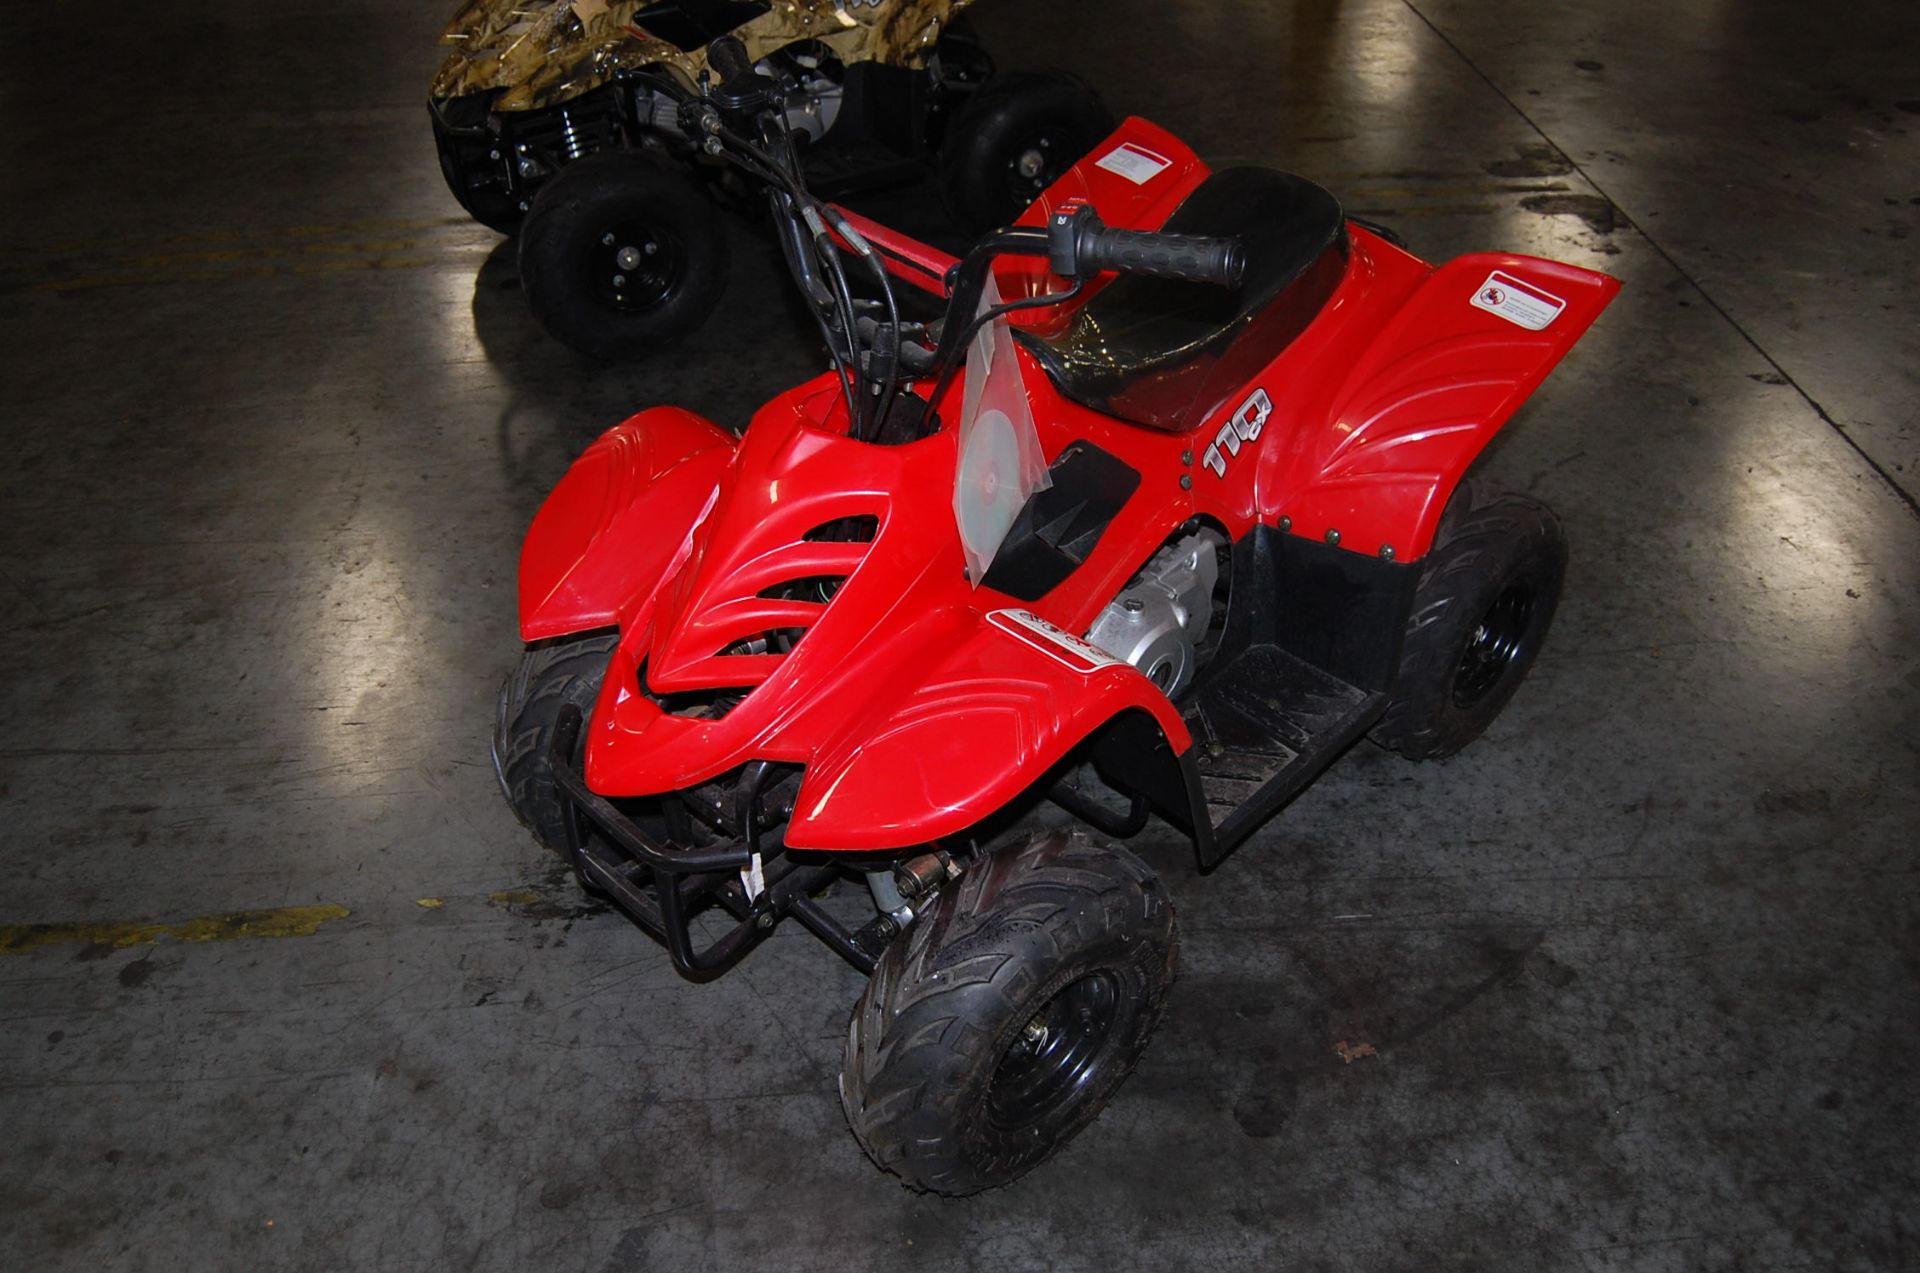 110CX ATV, NEW IN BOX, 110cc, Air cooled, 4 stroke, 1-cylinder automatic, electric start, chain